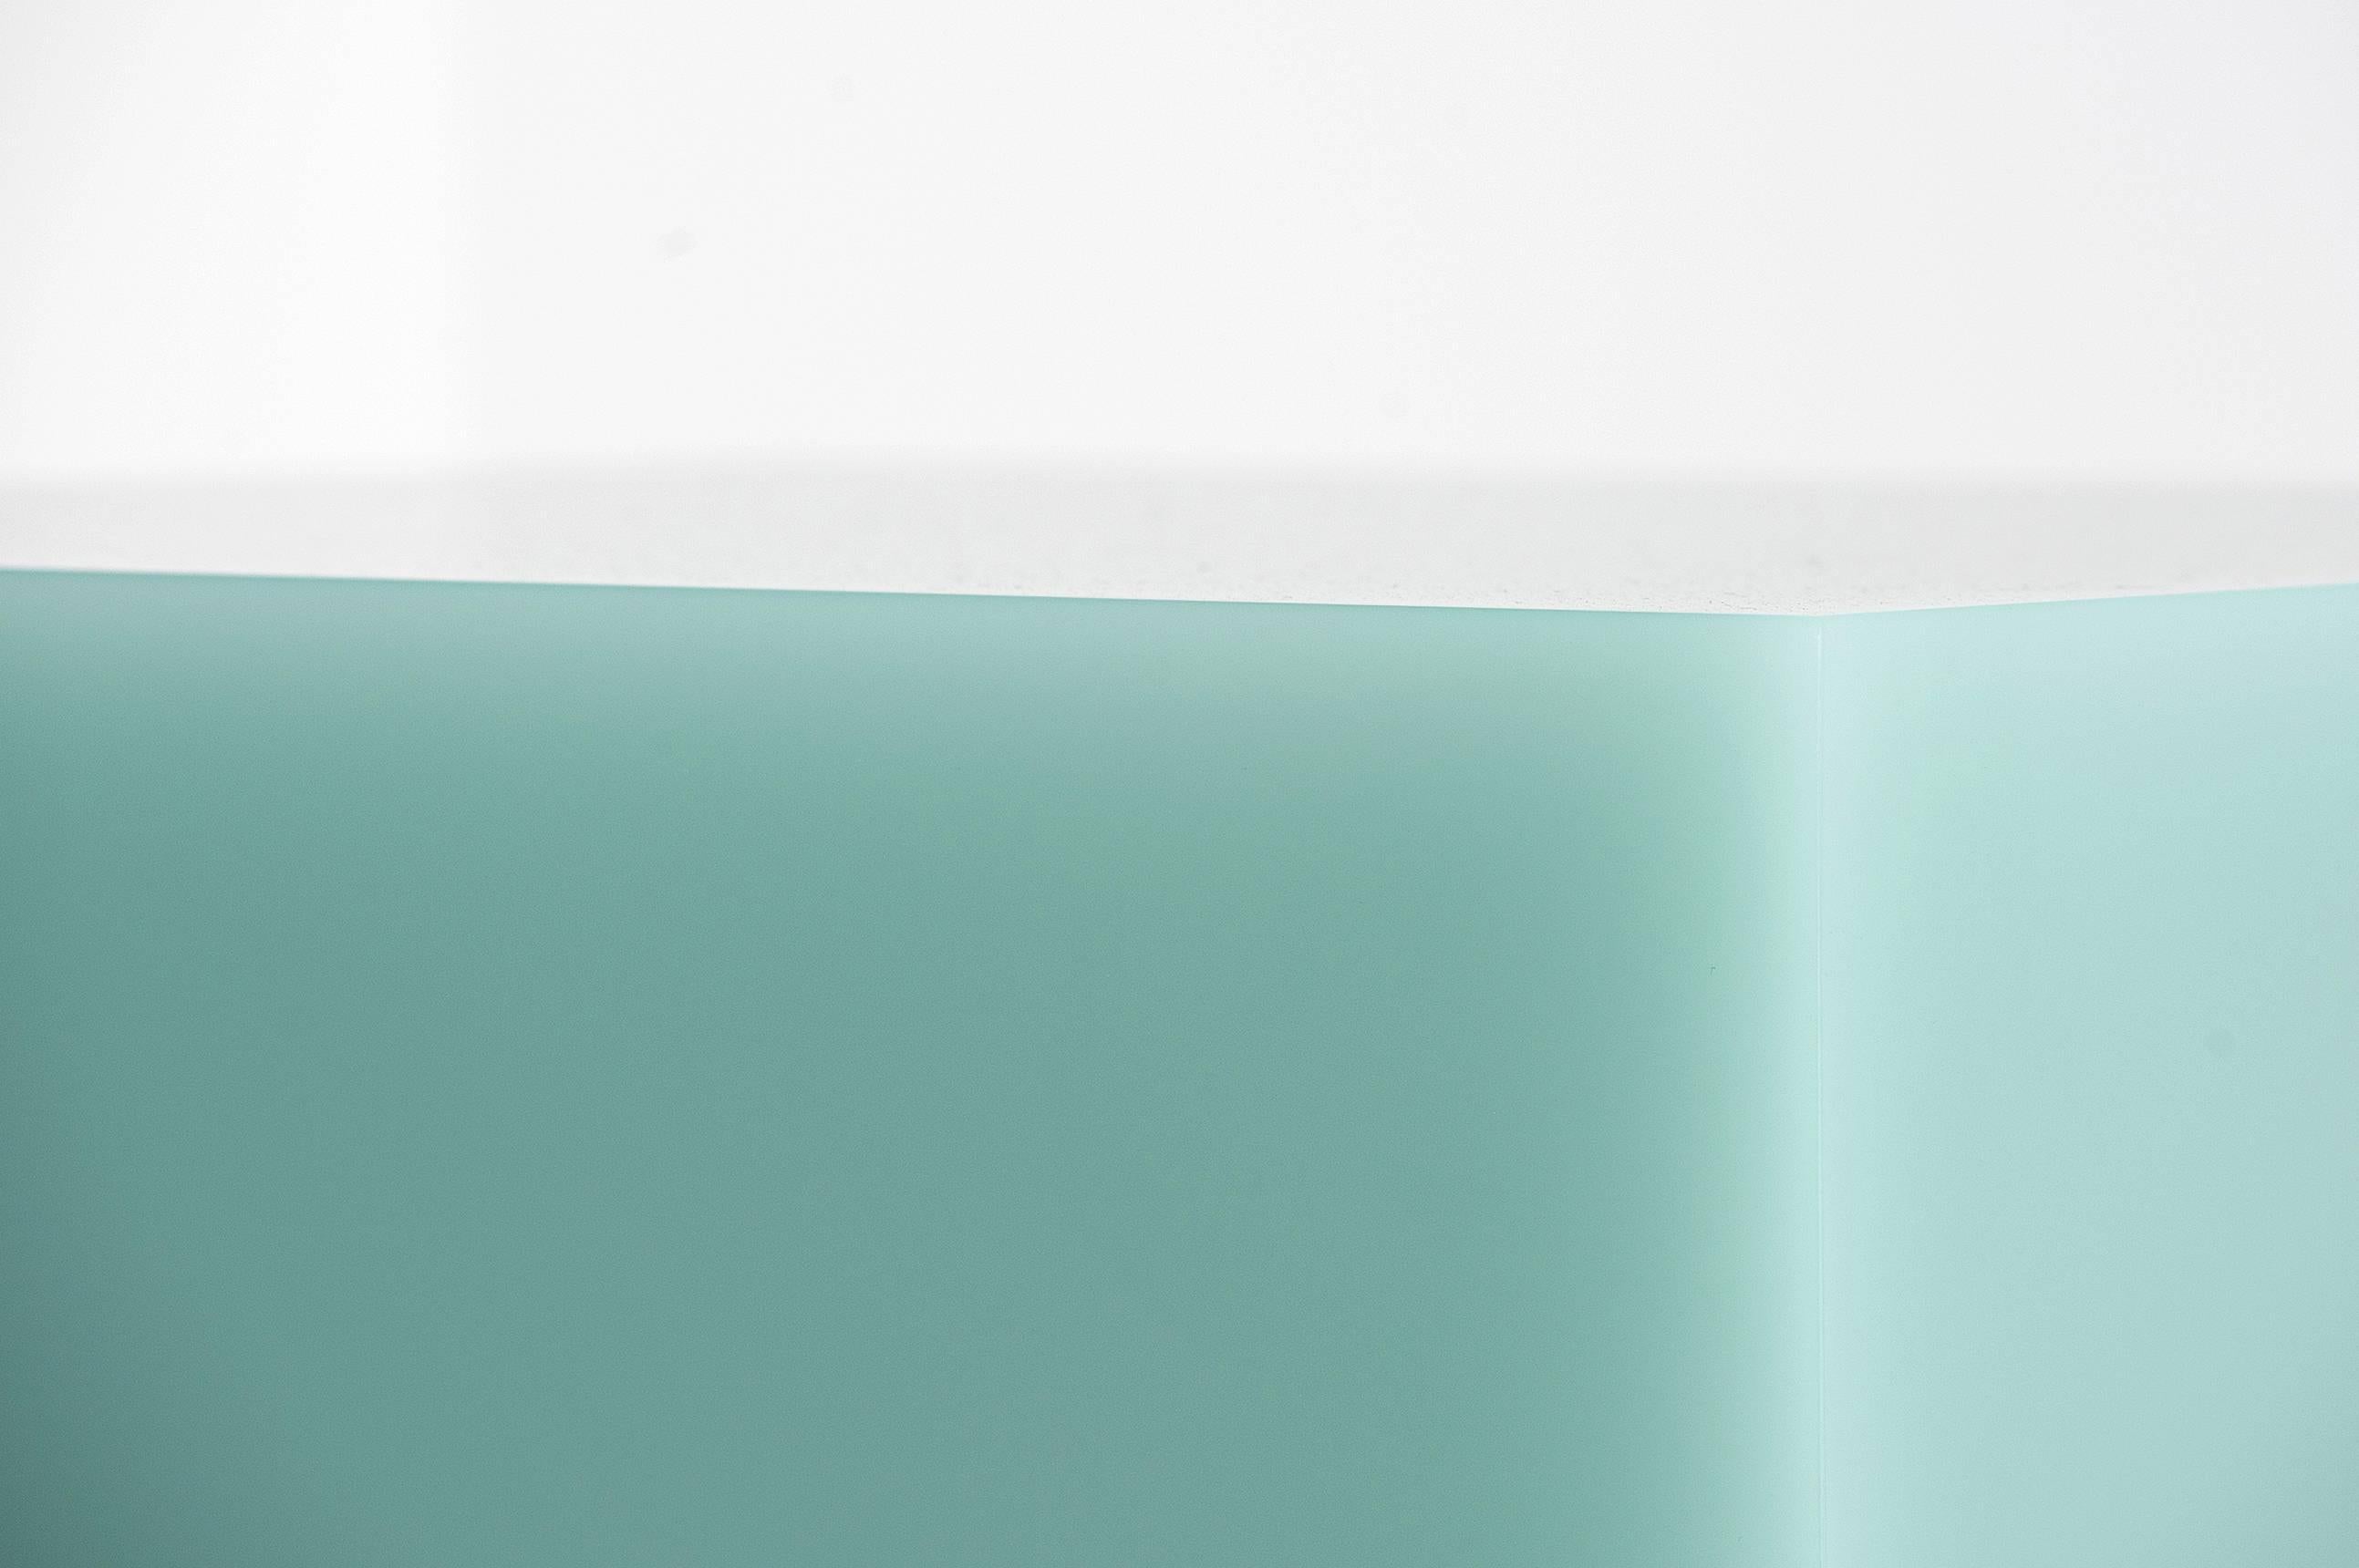 Sabine Marcelis 

Freestanding table in mint
From the series “Candy Cubes”
Manufactured by Sabine Marcelis
Produced for Side Gallery
Rotterdam, The Netherlands, 2017
High polished single cast resin.

Measurements
50 cm x 50 cm x 50h cm.
19.68 in x